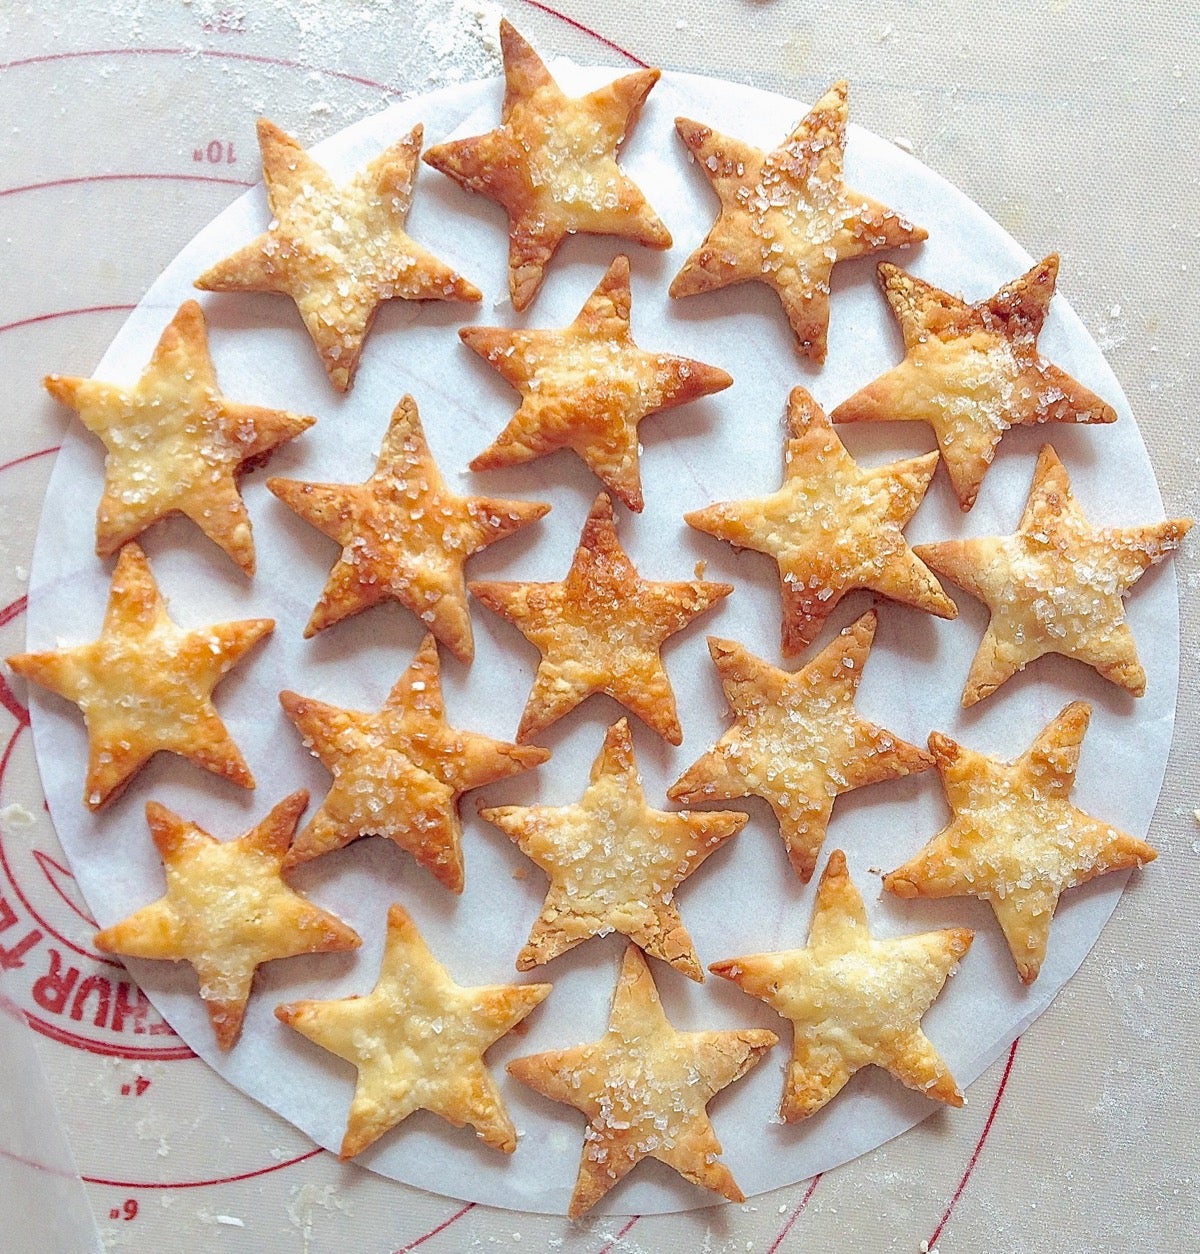 Baked pastry star cutouts arranged on a 9" parchment round to check the design before transferring to the top of a blueberry pie.